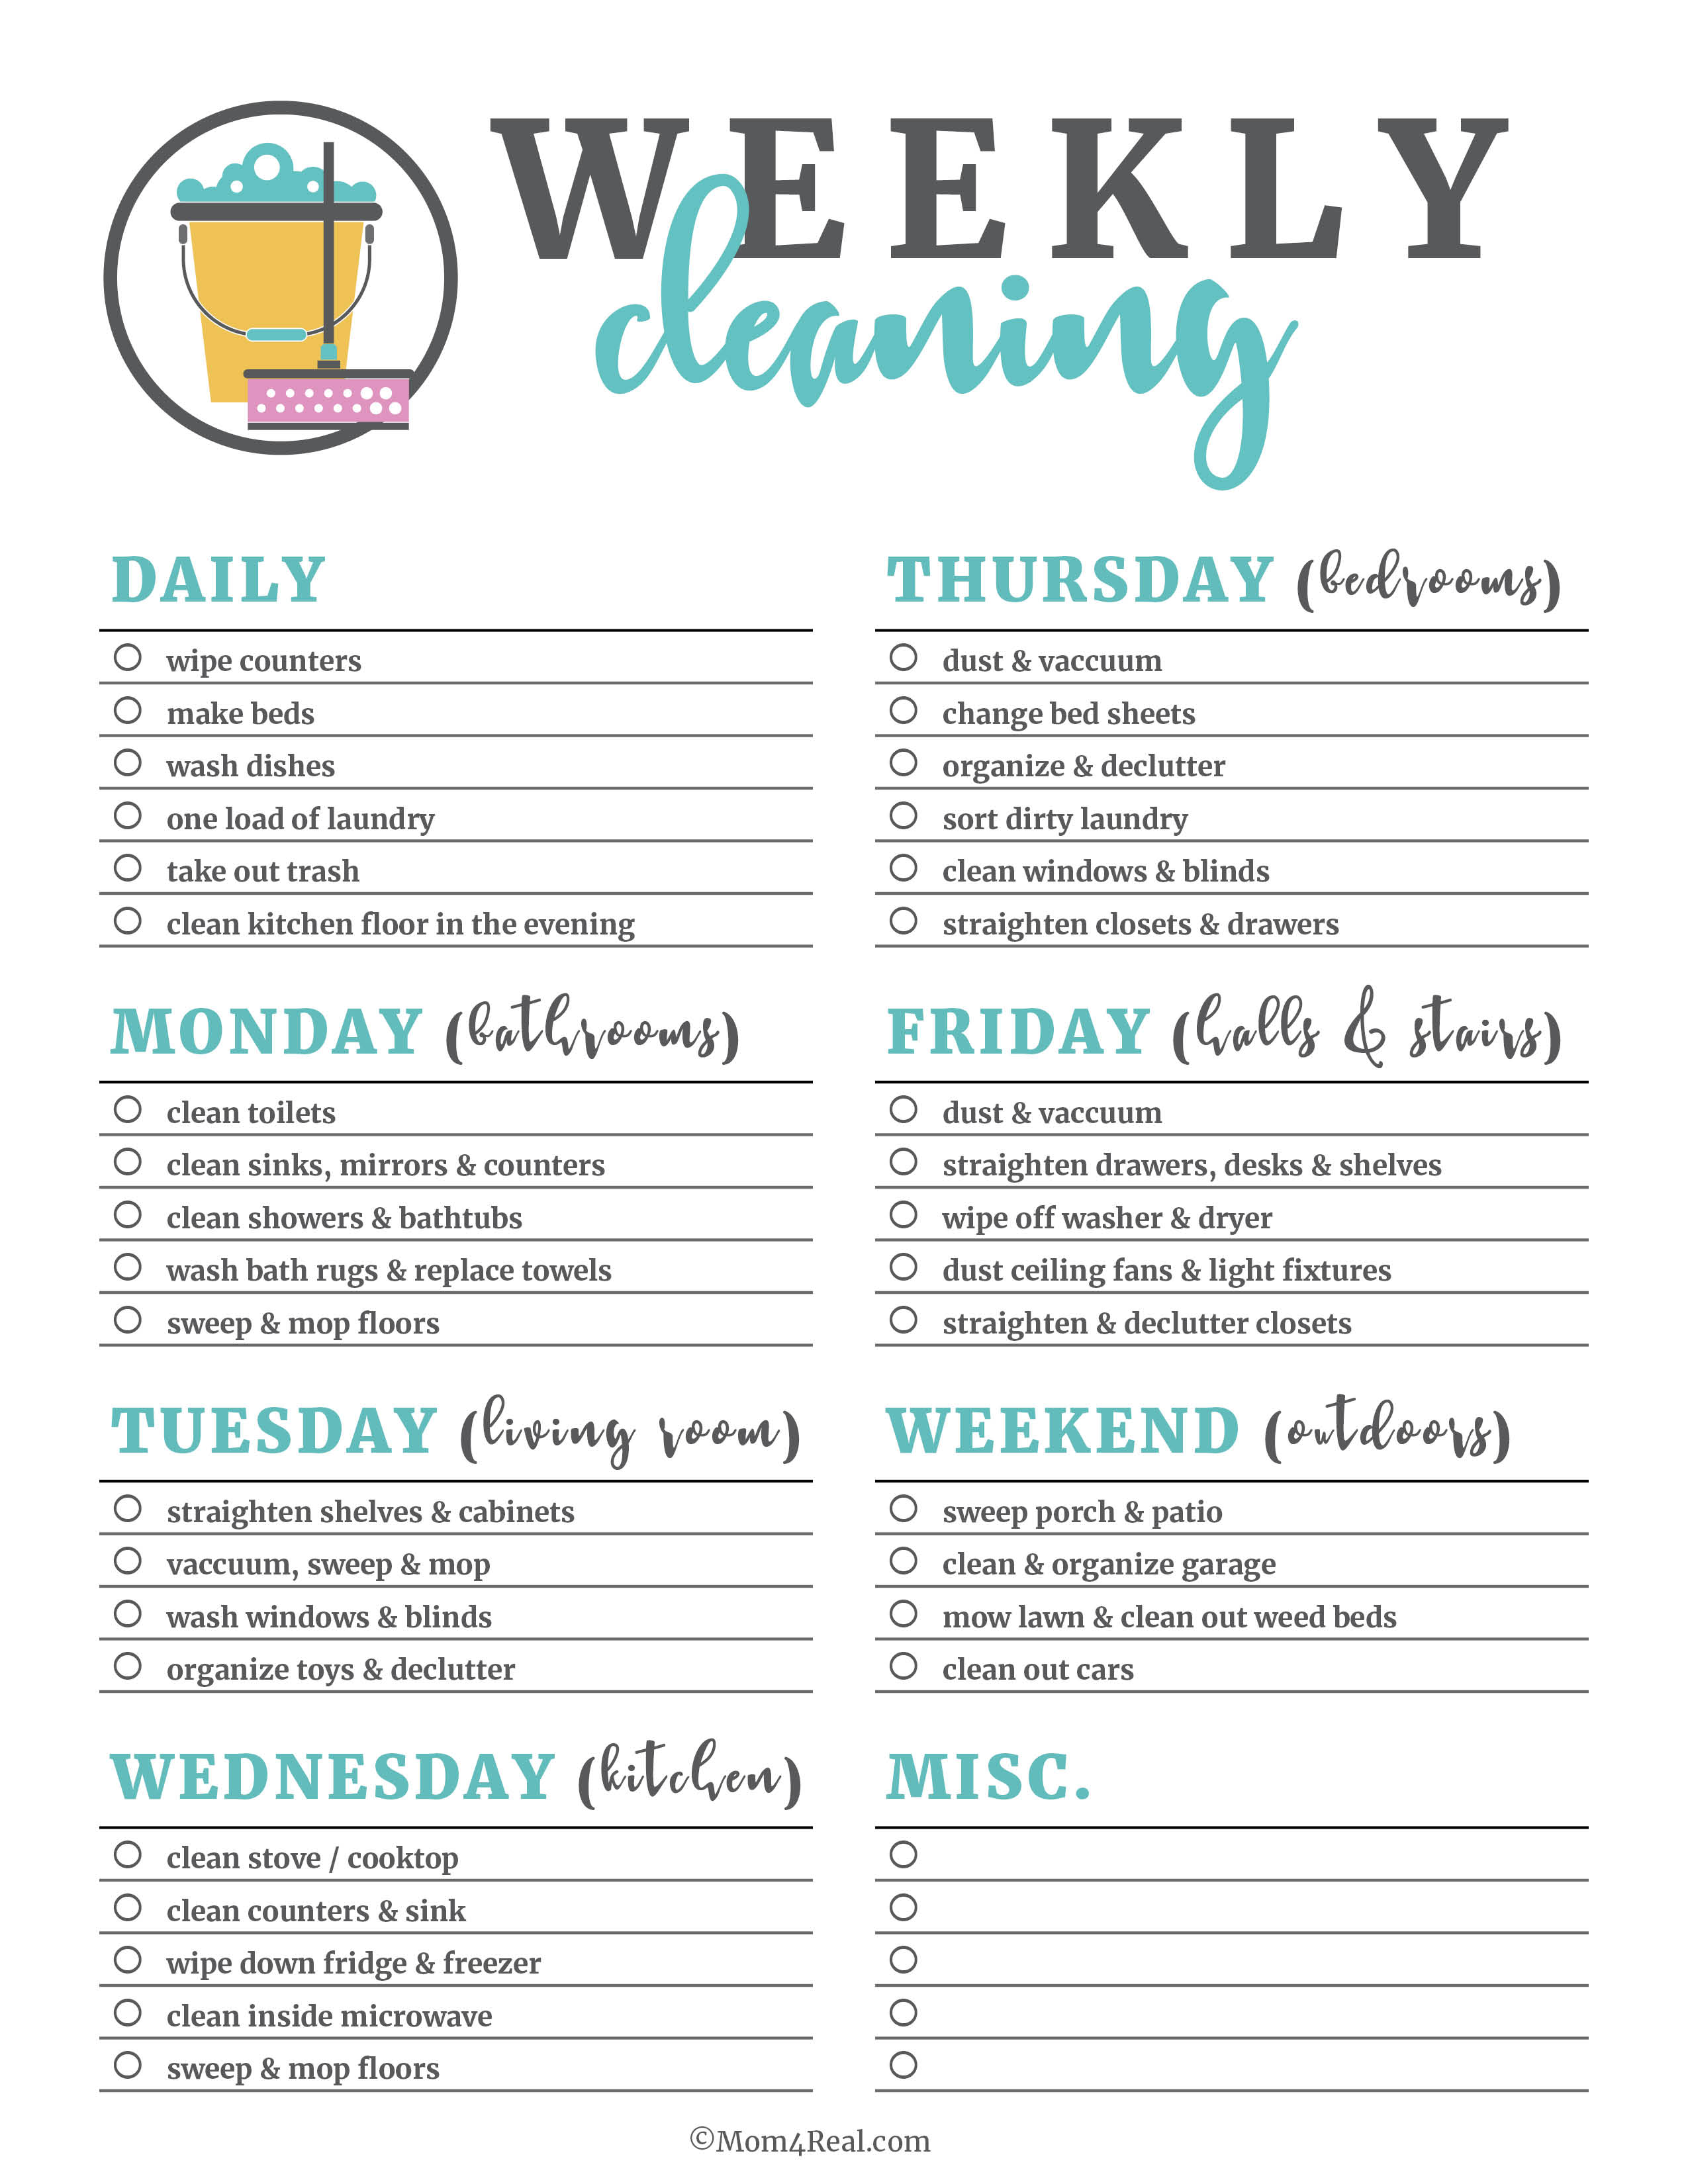 Cleaning Checklist Printable | room surf.com